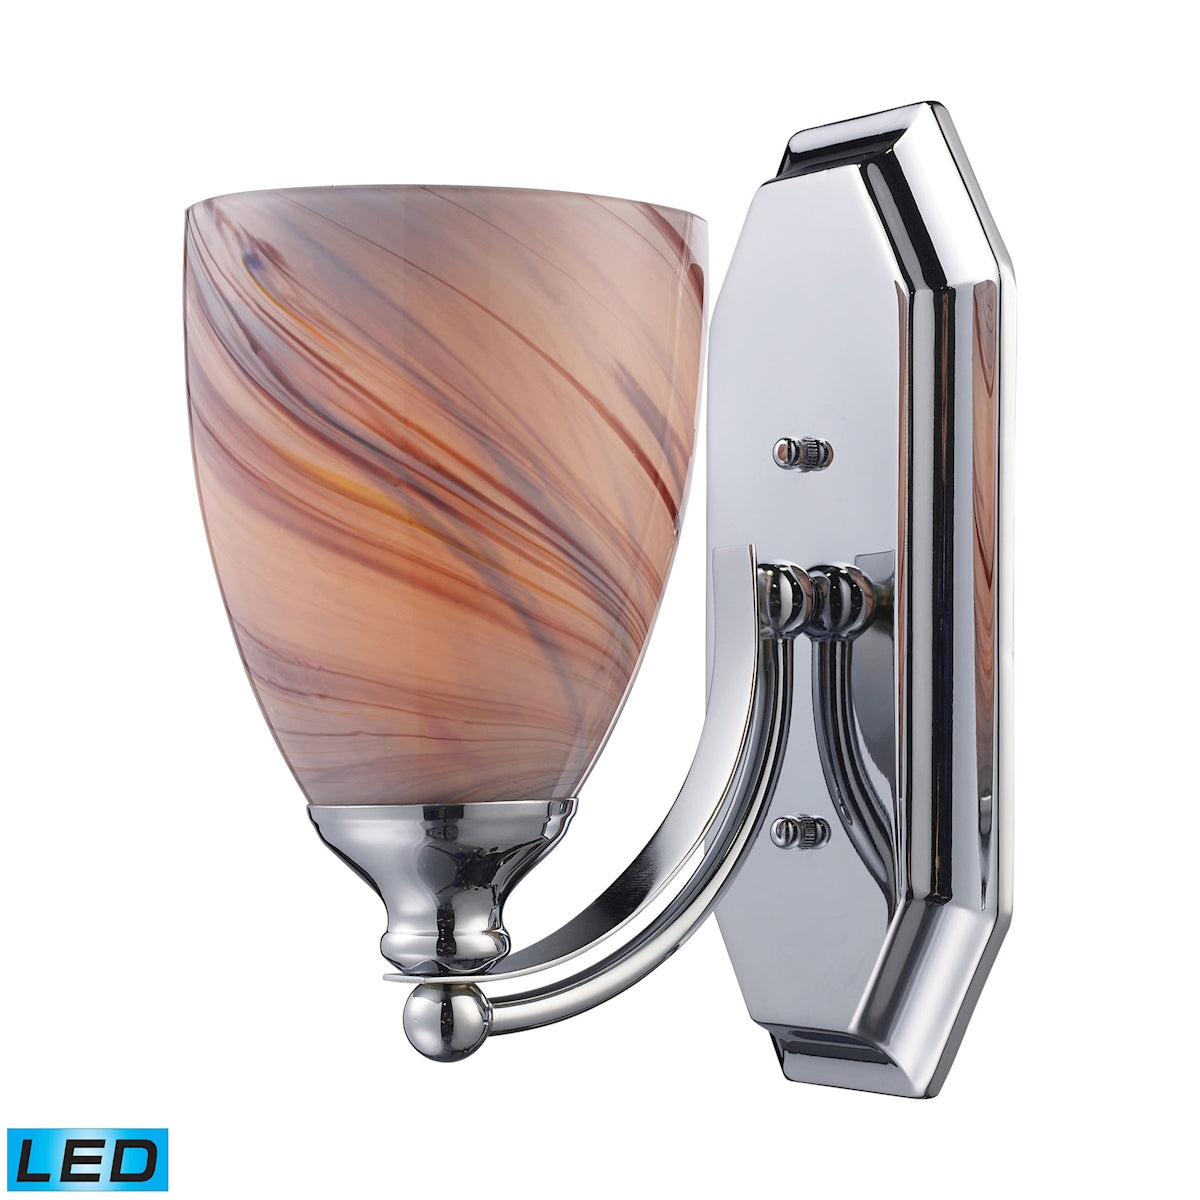 Mix and Match Vanity 1-Light Wall Lamp in Chrome with Creme Glass - Includes LED Bulb